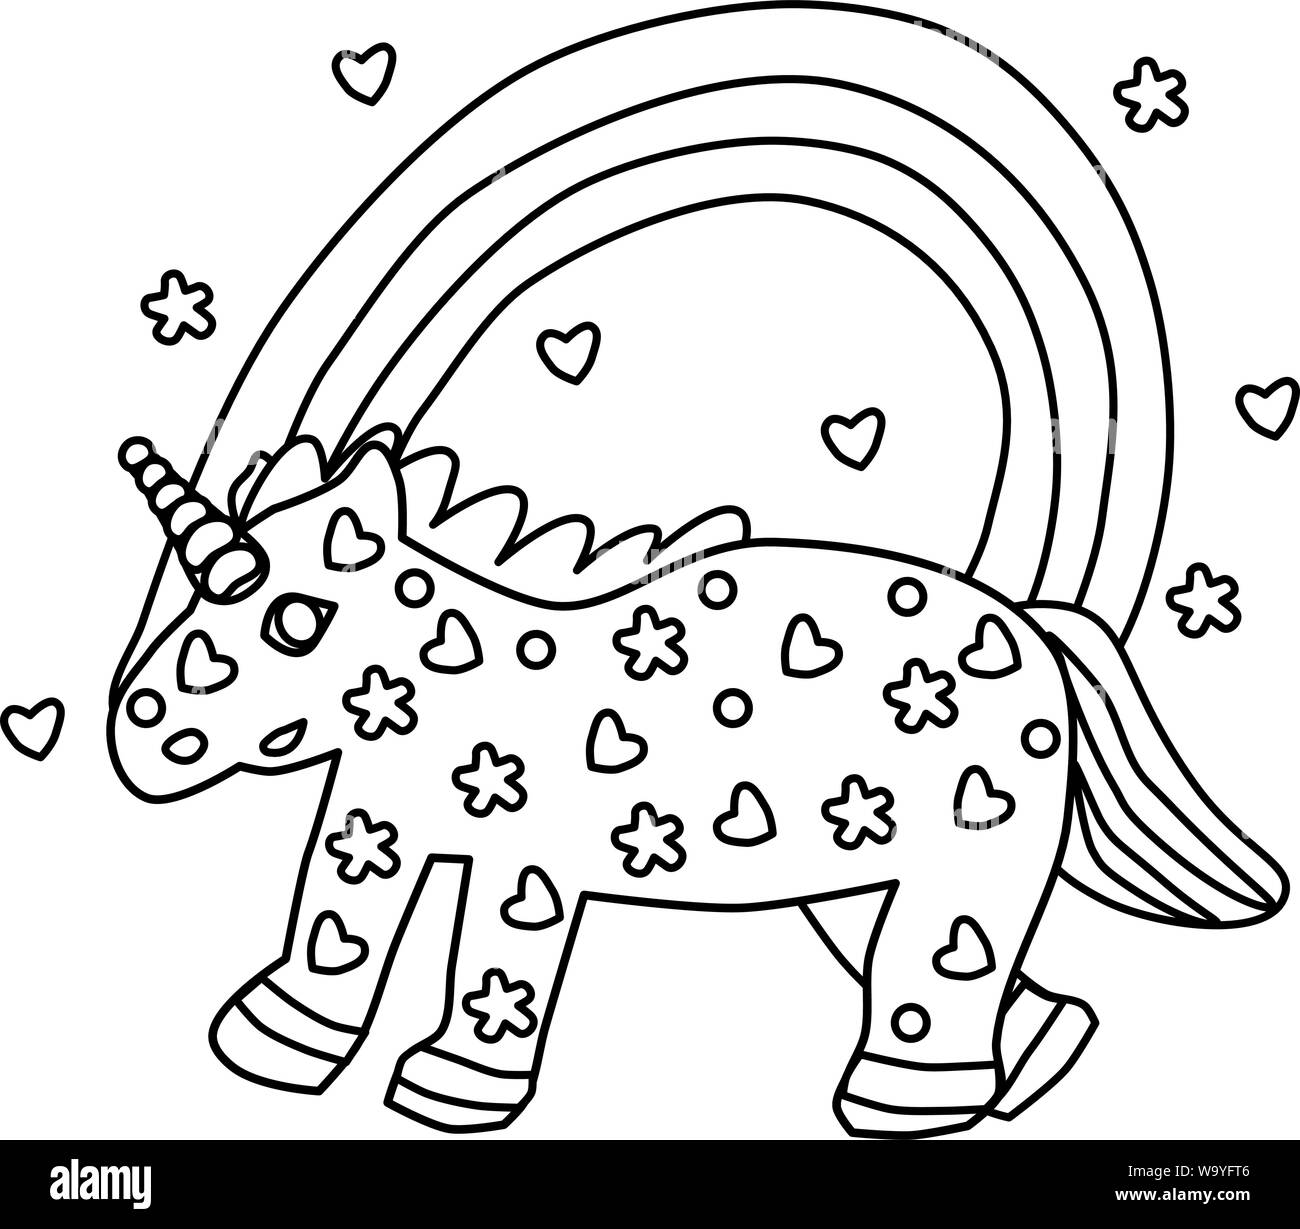 Coloring book unicorn and rainbow. White drawing for kids. Children's creative coloring. Fairytale character. Stock Vector